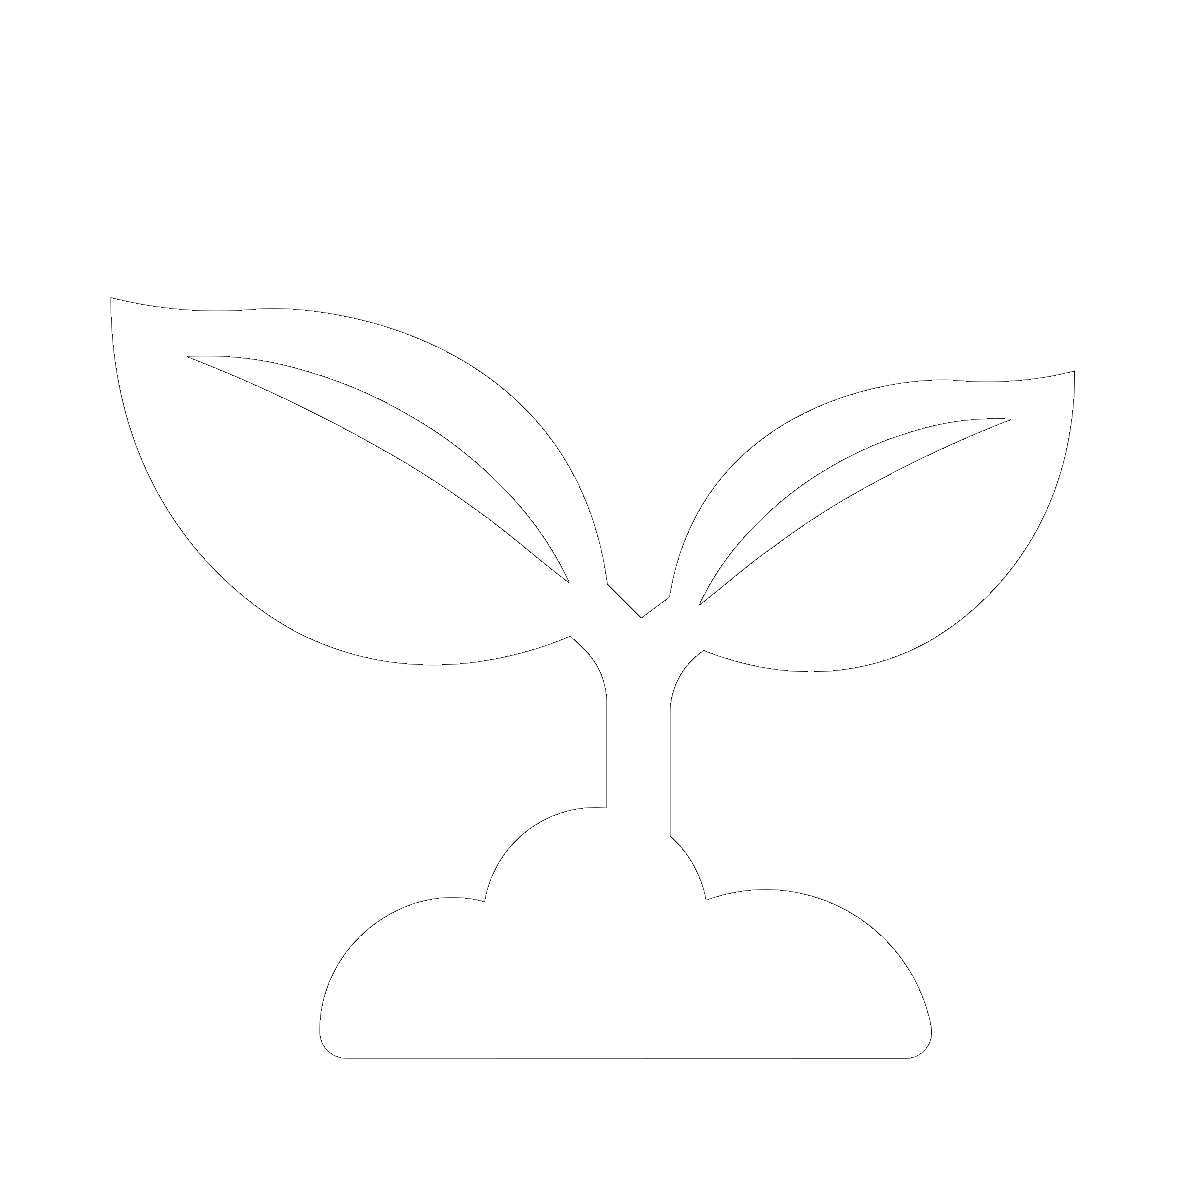 Symbol The Seed